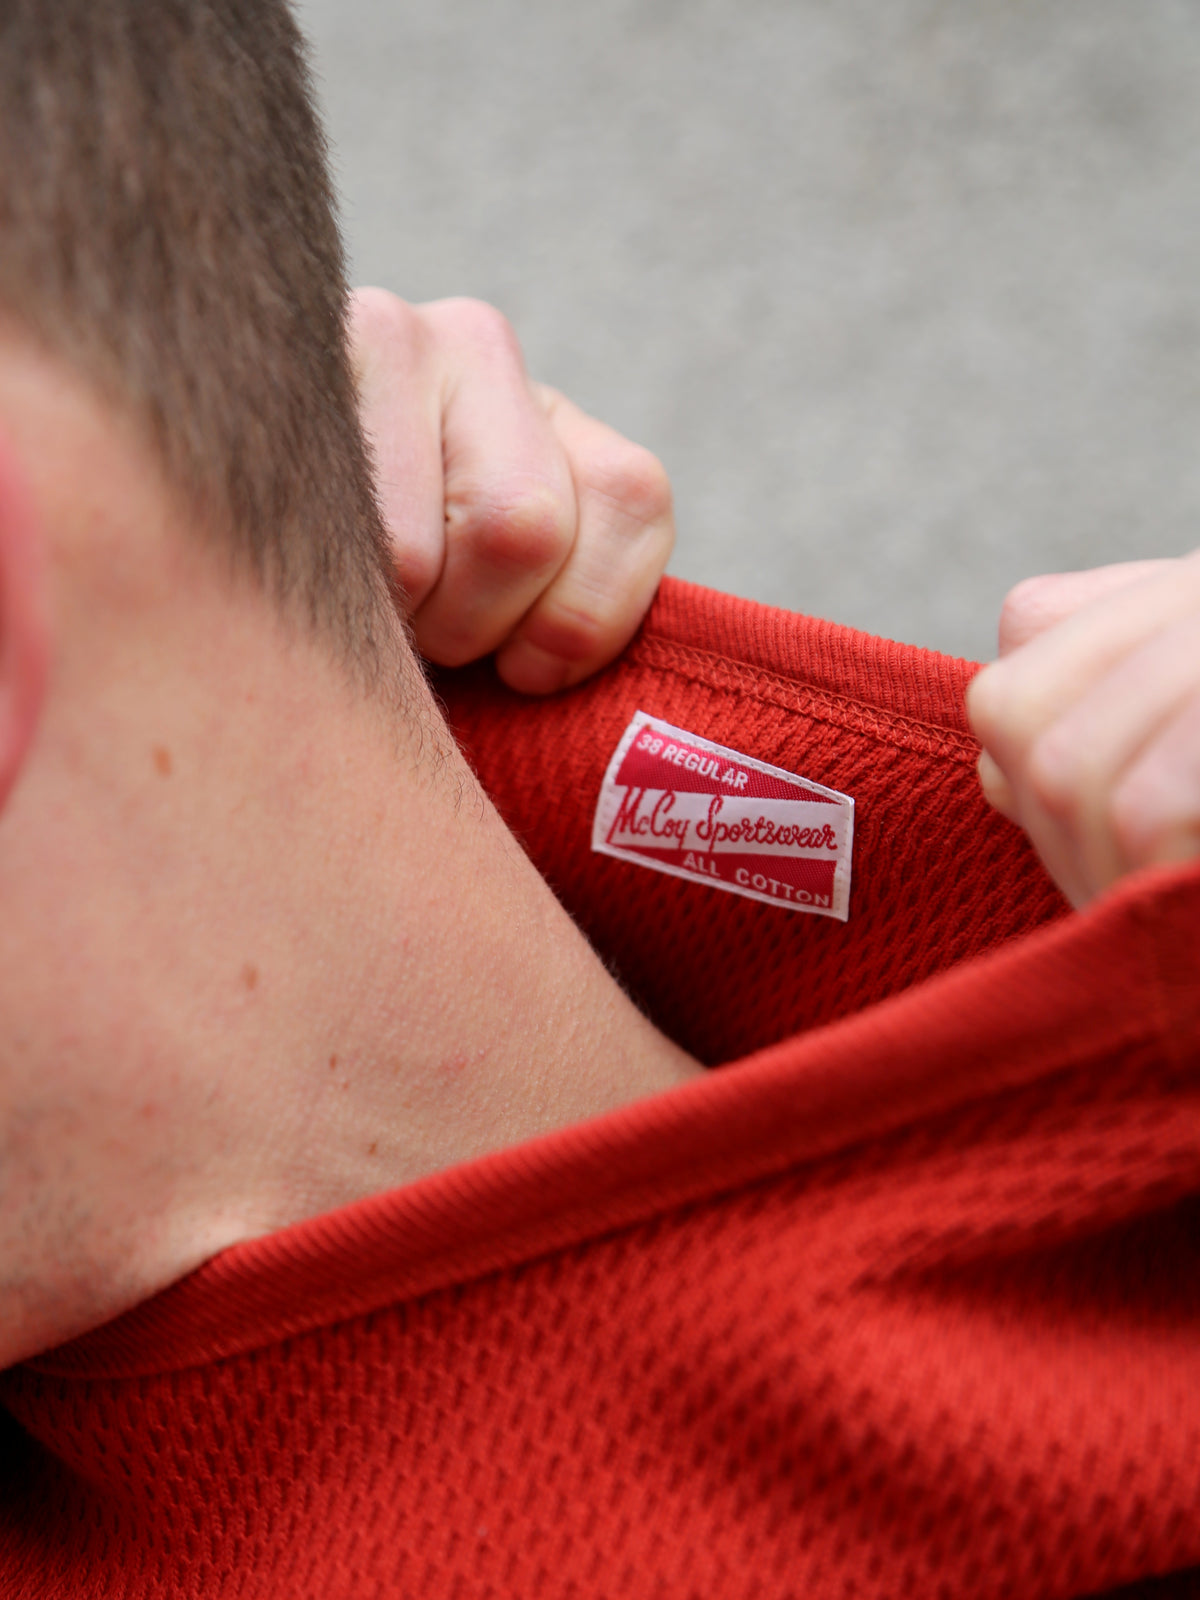 The Real McCoy's Honeycomb Thermal Shirt – Red (MC23115)